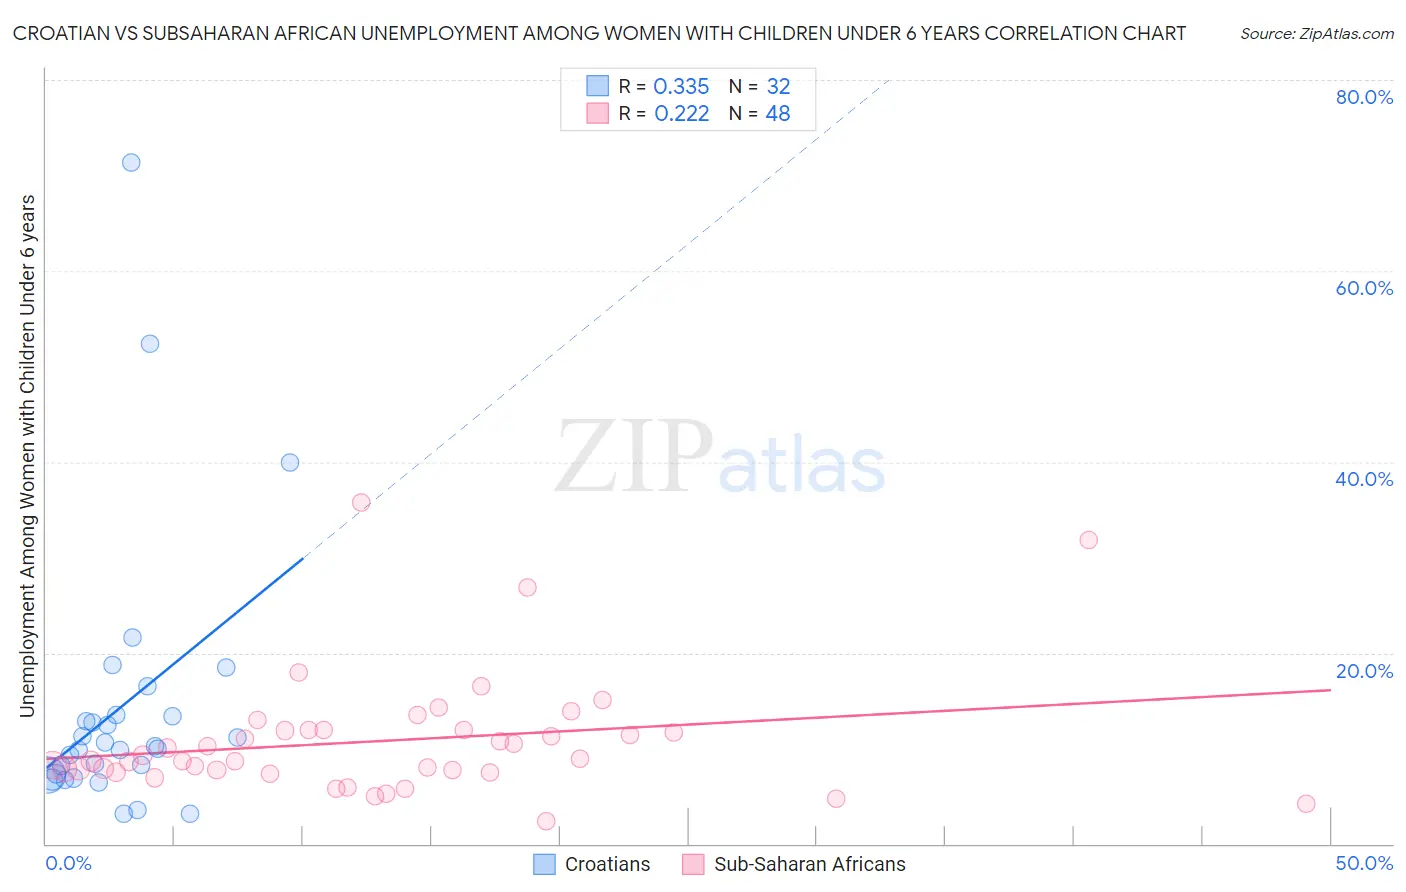 Croatian vs Subsaharan African Unemployment Among Women with Children Under 6 years